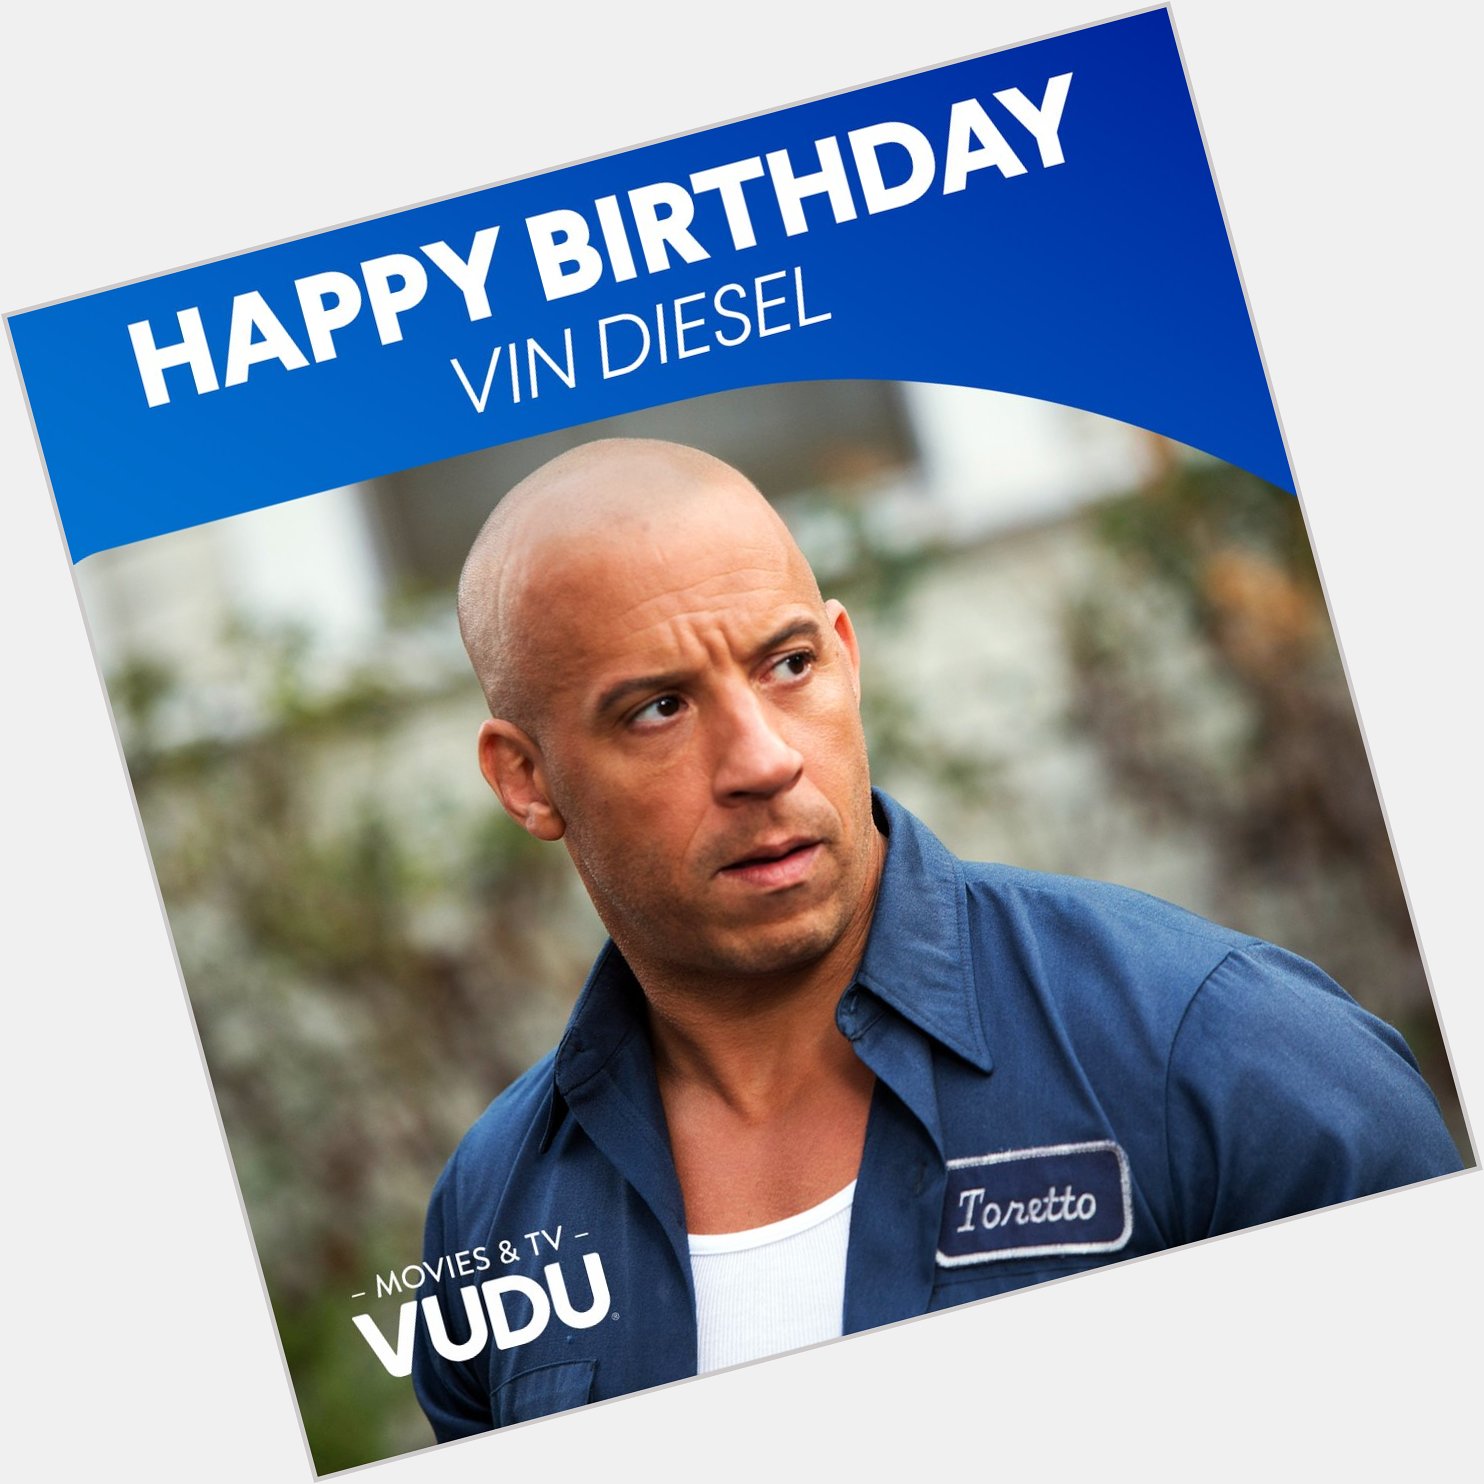 Happy birthday to the fast and furious, Vin Diesel! What is his most over-the-top scene? 